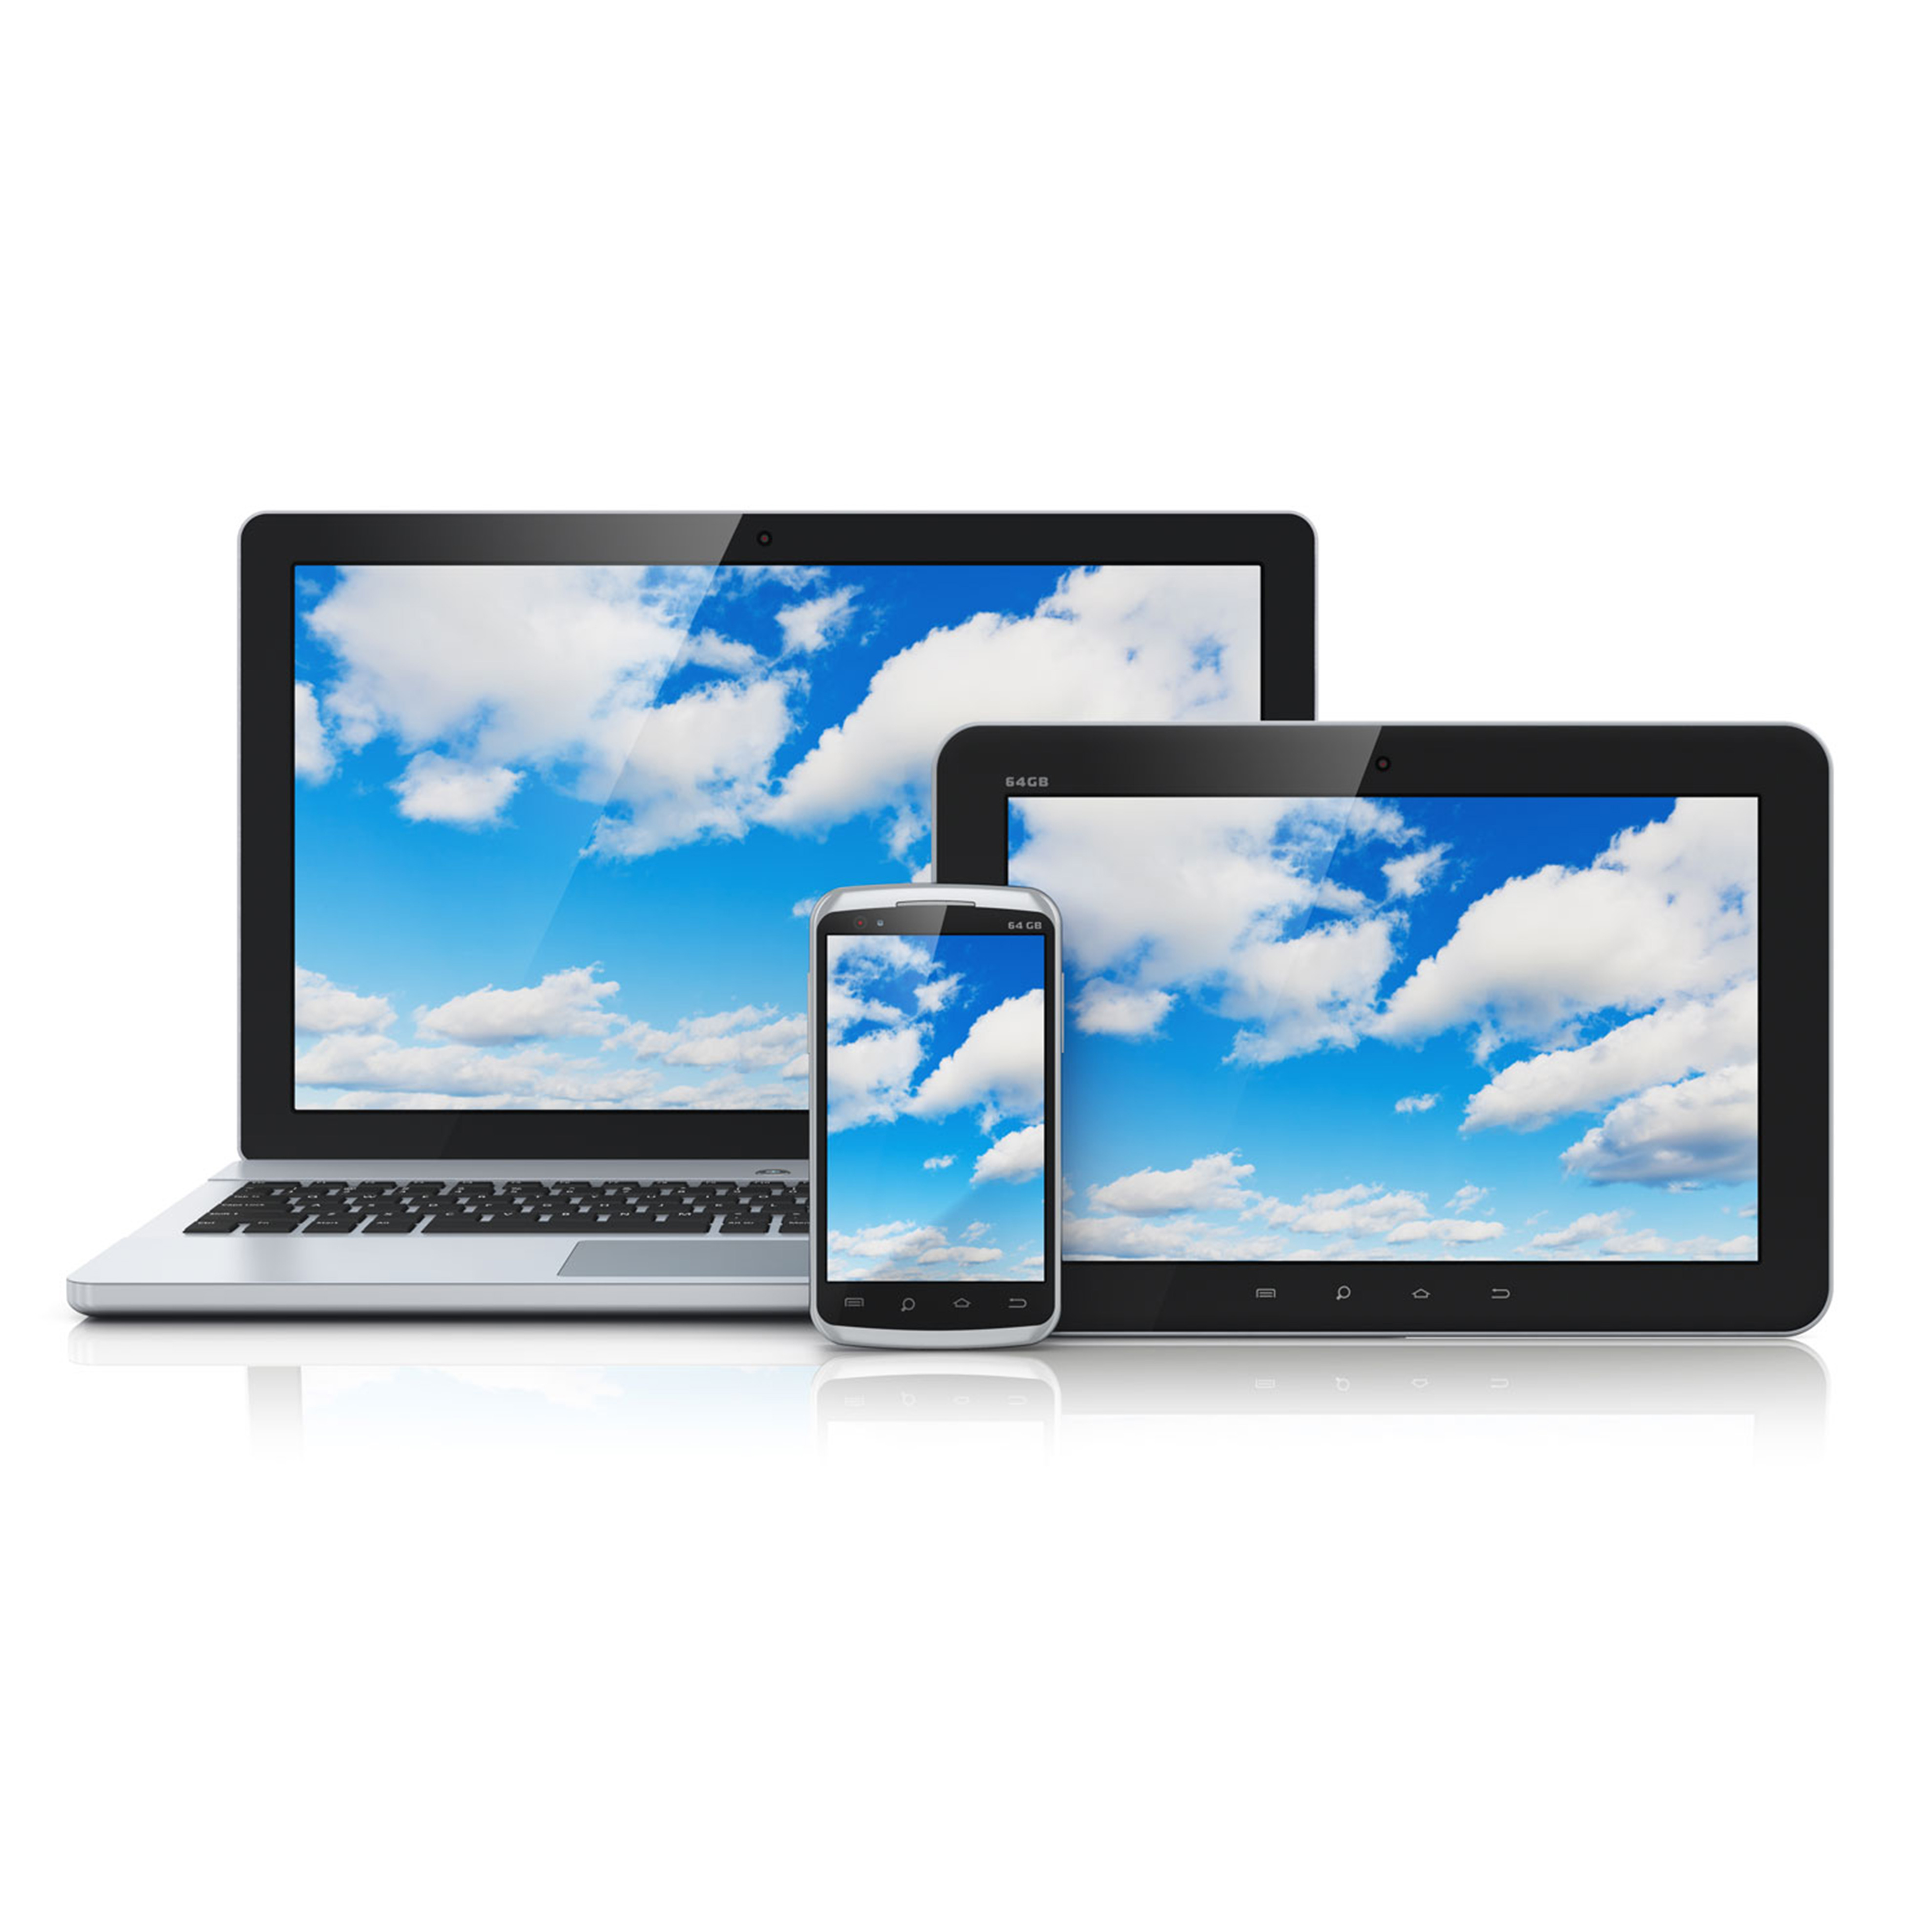 Laptop, tablet, and cell phone with cloud images